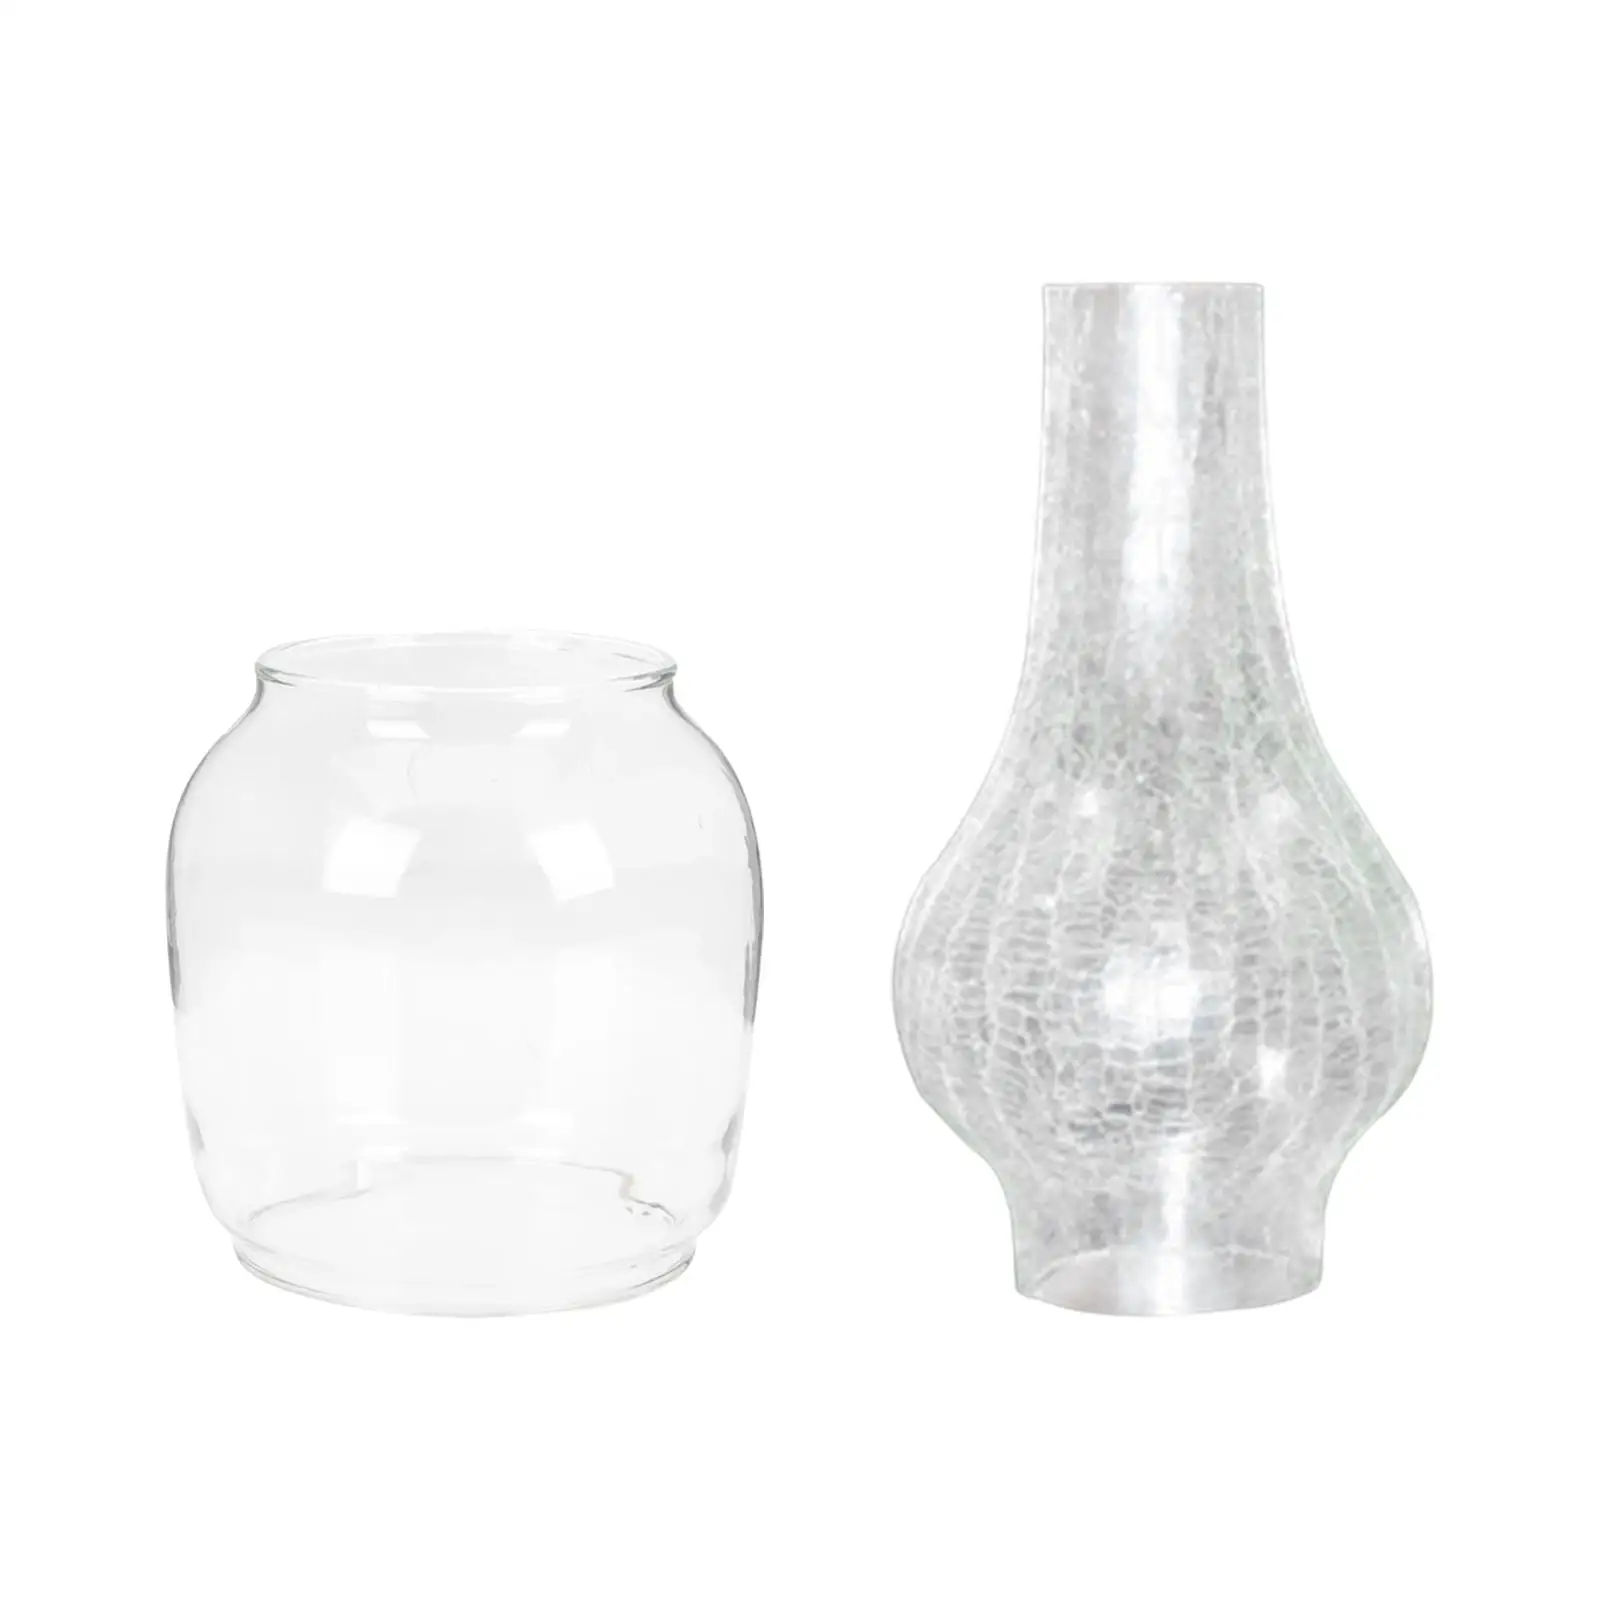 Oil Lamp Chimney Lamp Shade Glass Shade Accessories for Bedroom Home Fireplace